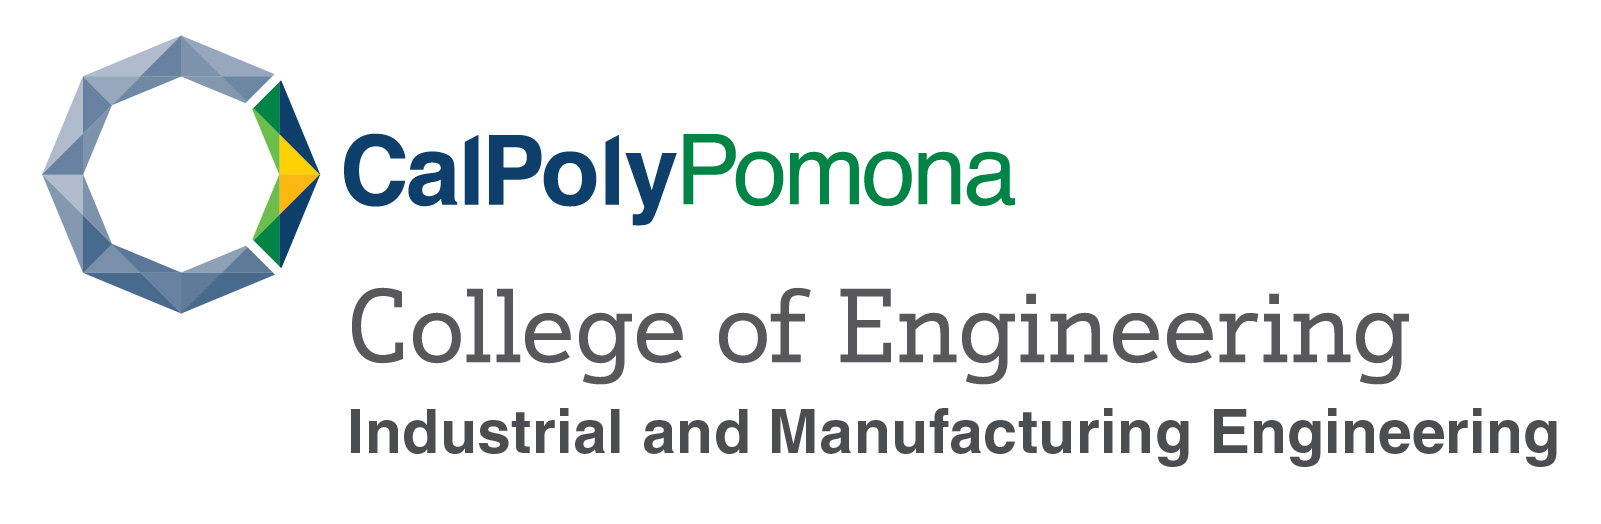 Cal Poly Pomona College of Engineering Industrial and Manufacturing Engineering